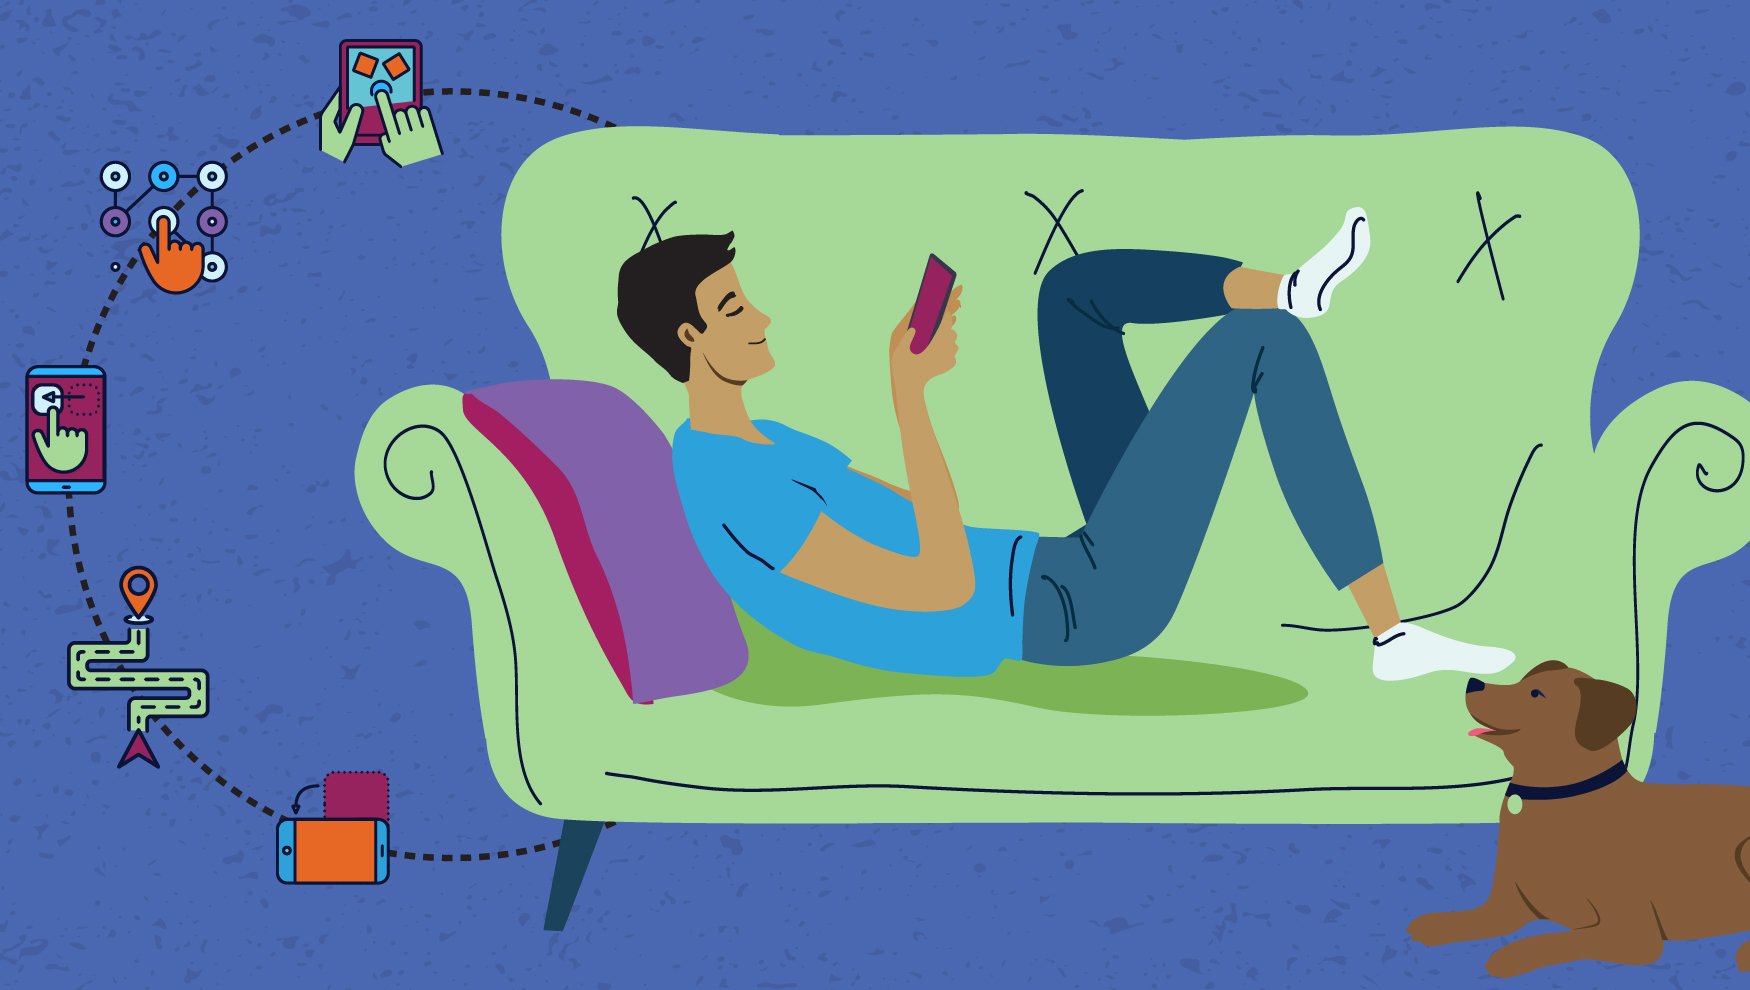 Illustration of man on couch as Feedzai's ScamPrevent enables stronger scam prevention to block financial crime